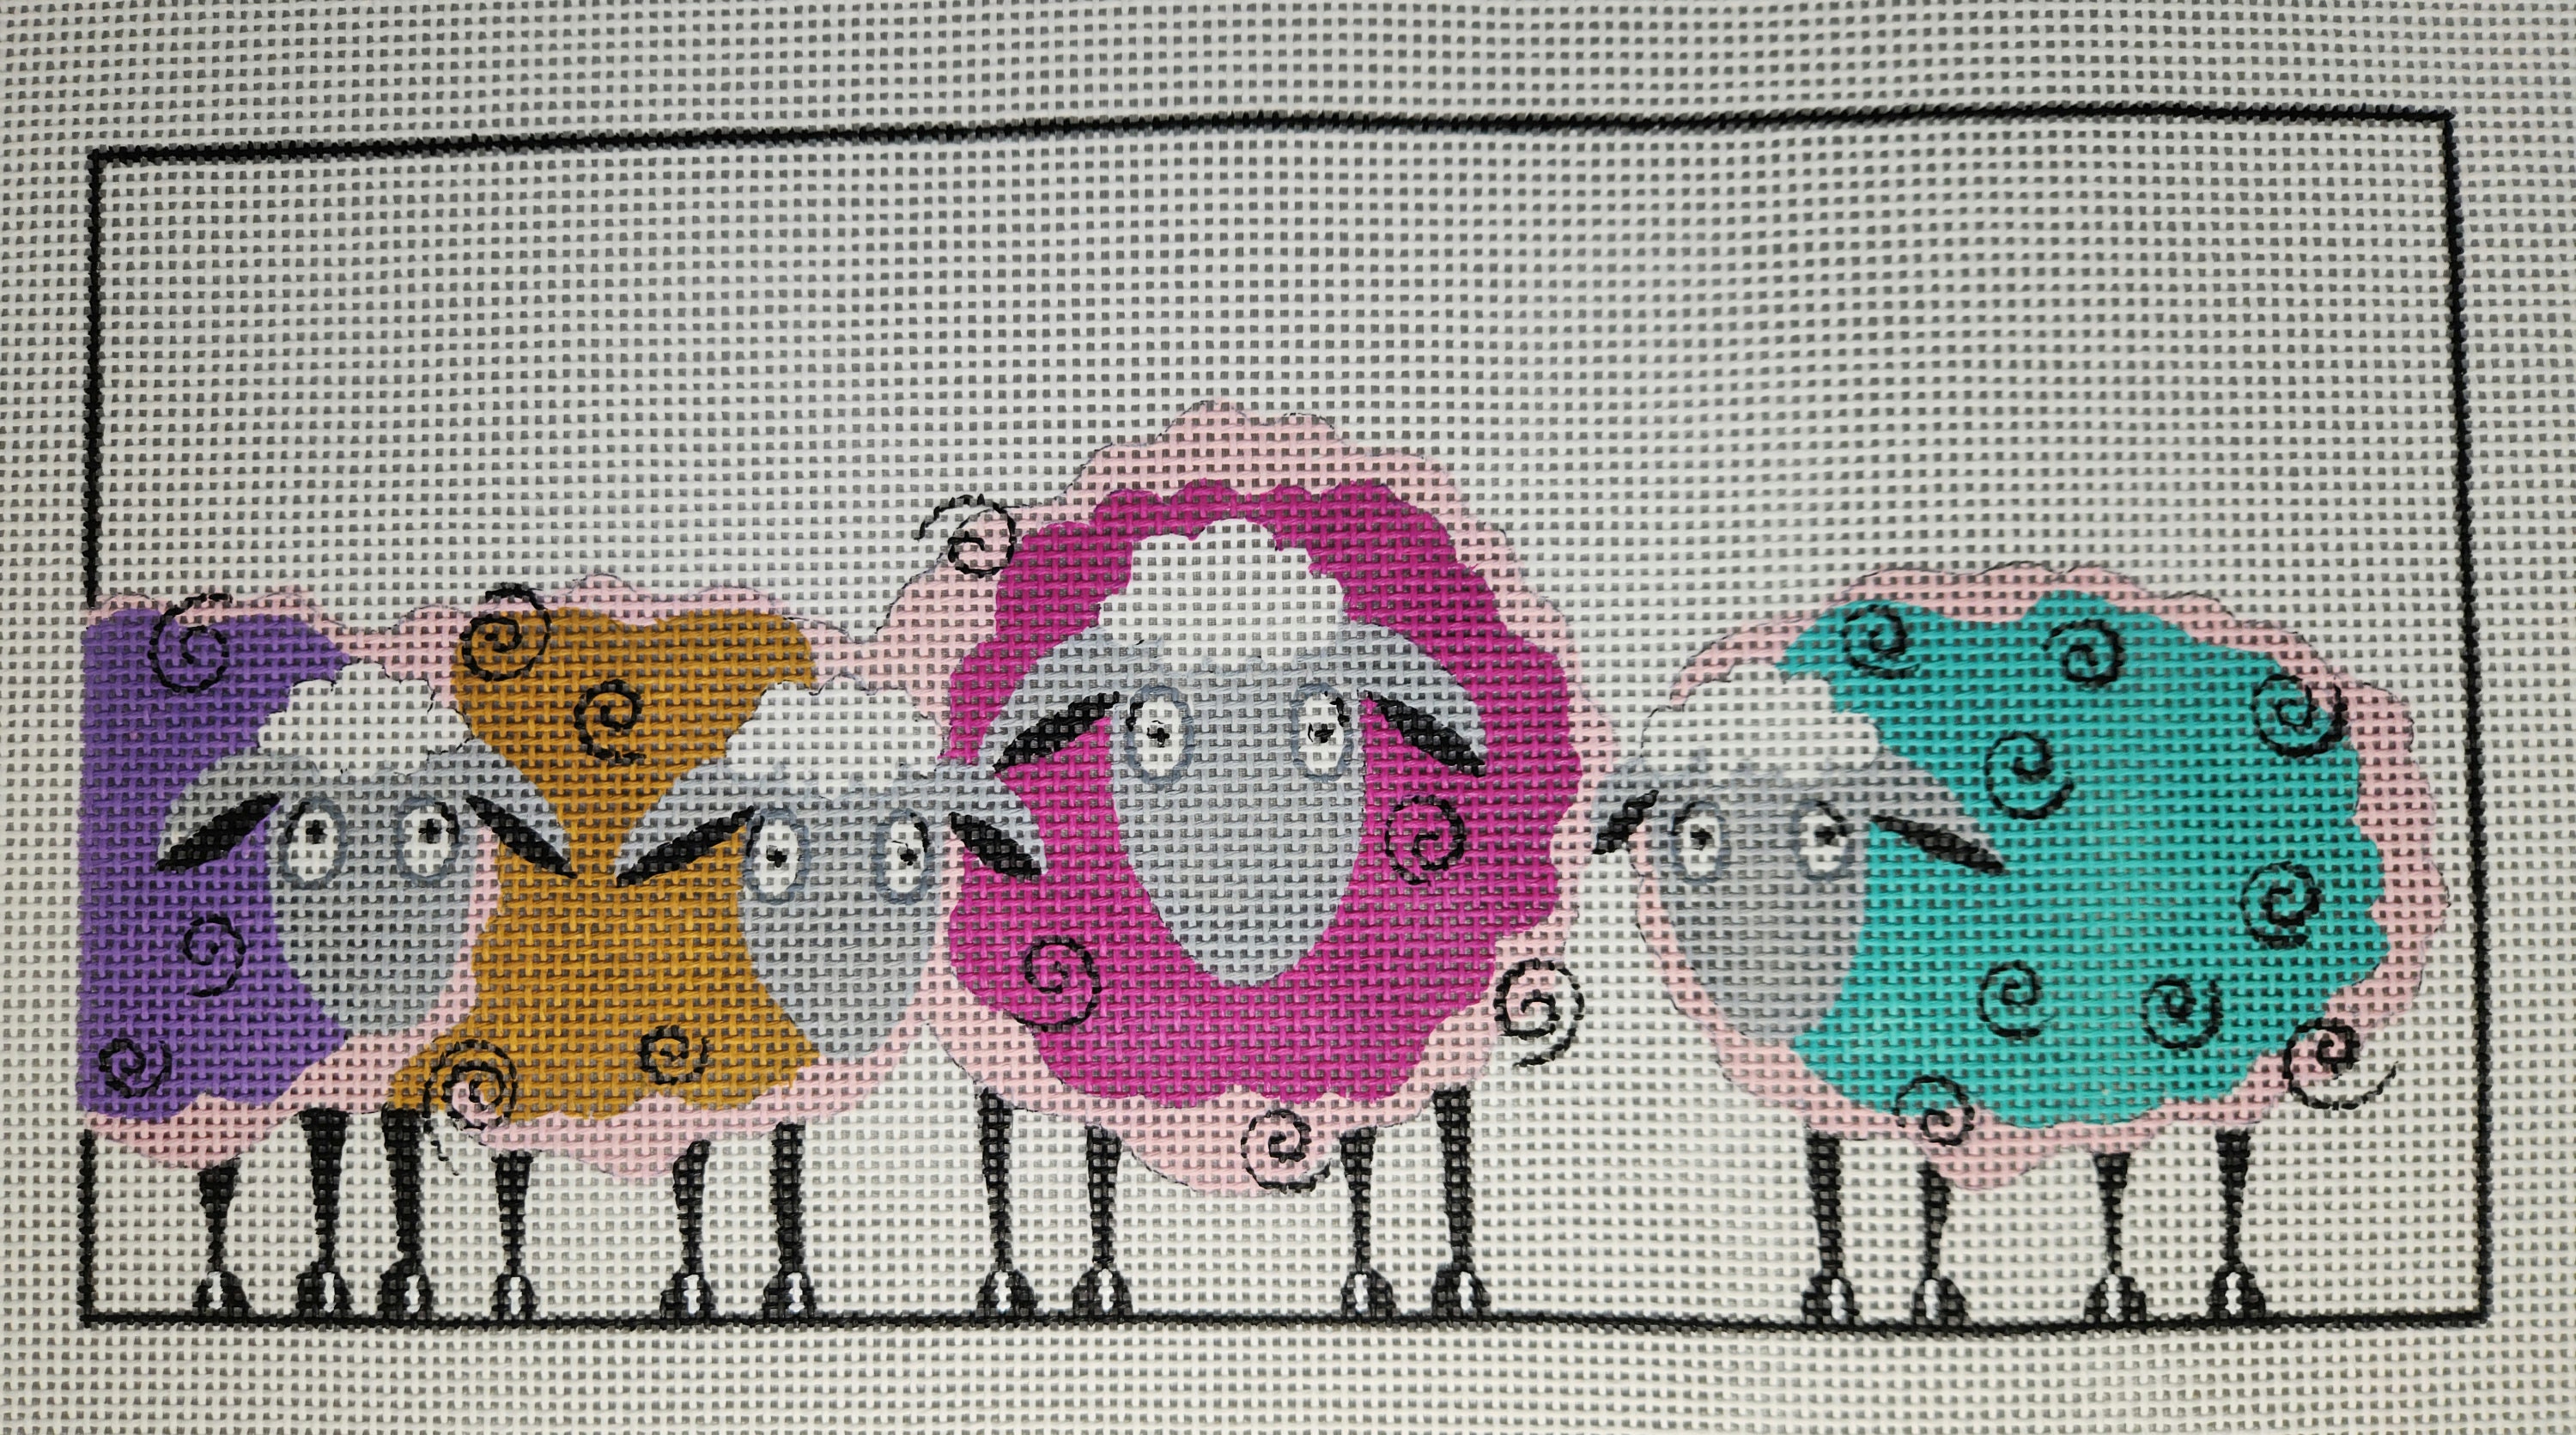 Wee Three Sheep needlepoint kit is on 10 mesh canvas and measures